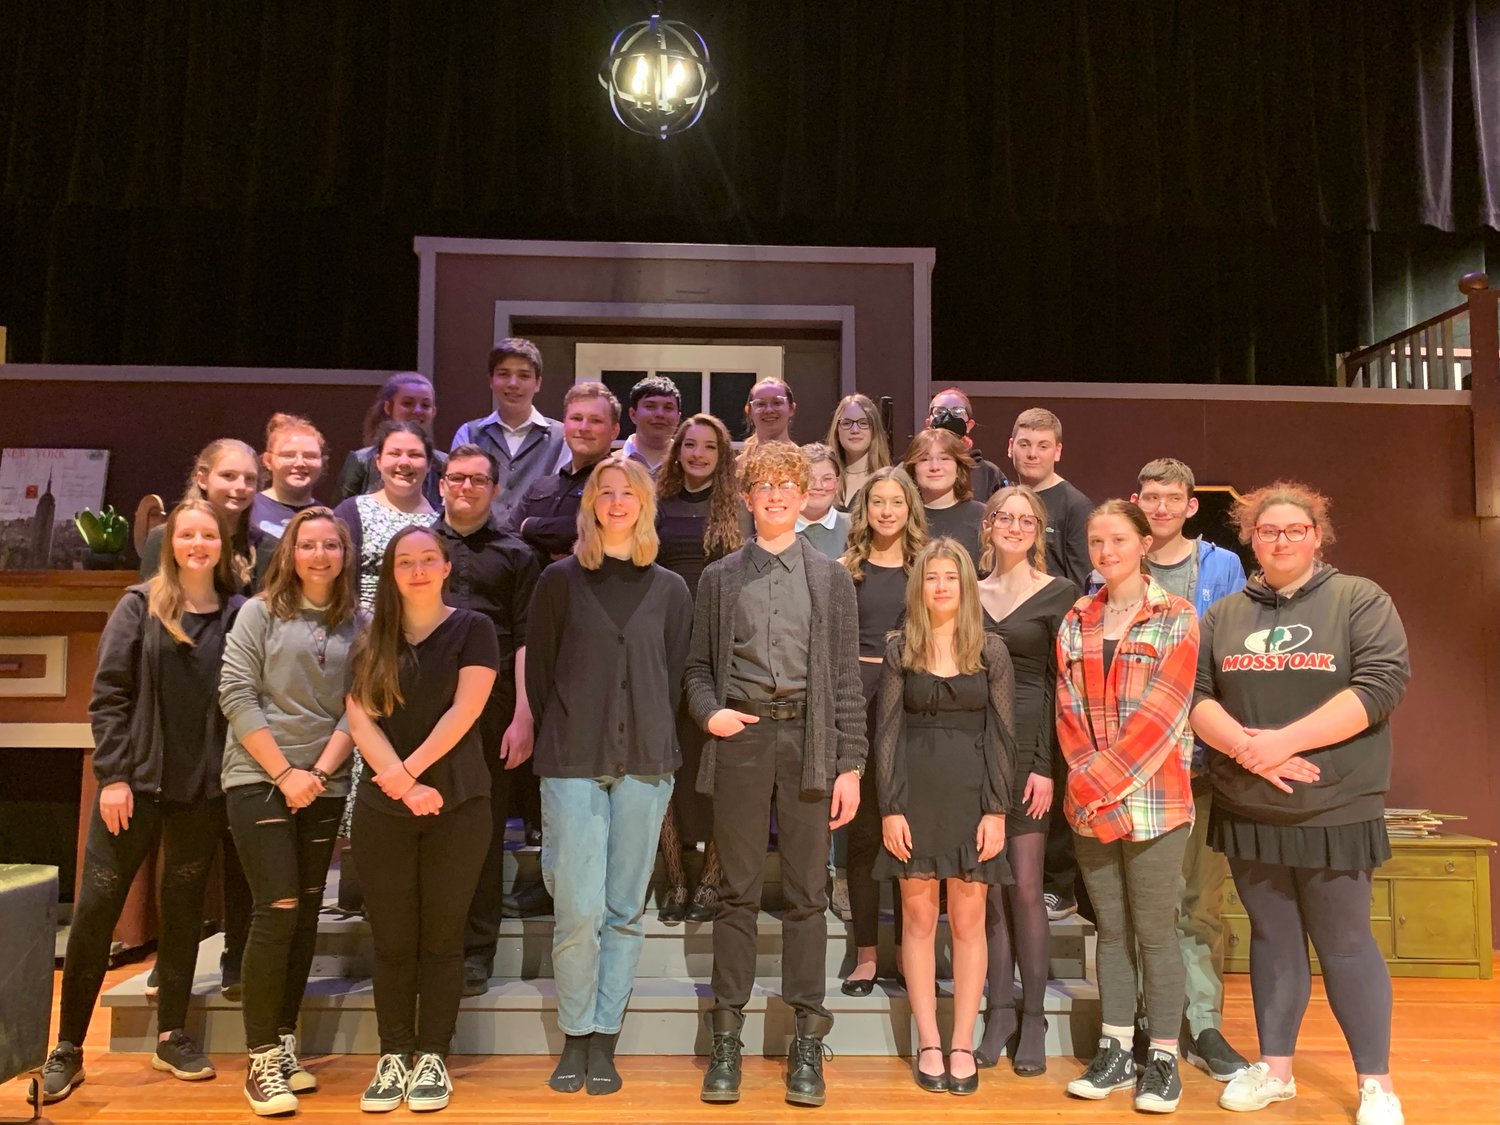 This spring, Cael Sullivan’s final curtain call at Camden High School will be performing his own, original full-length play Stars Hide Your Fires. For the past four years, Sullivan has been a staple on the CHS stage.